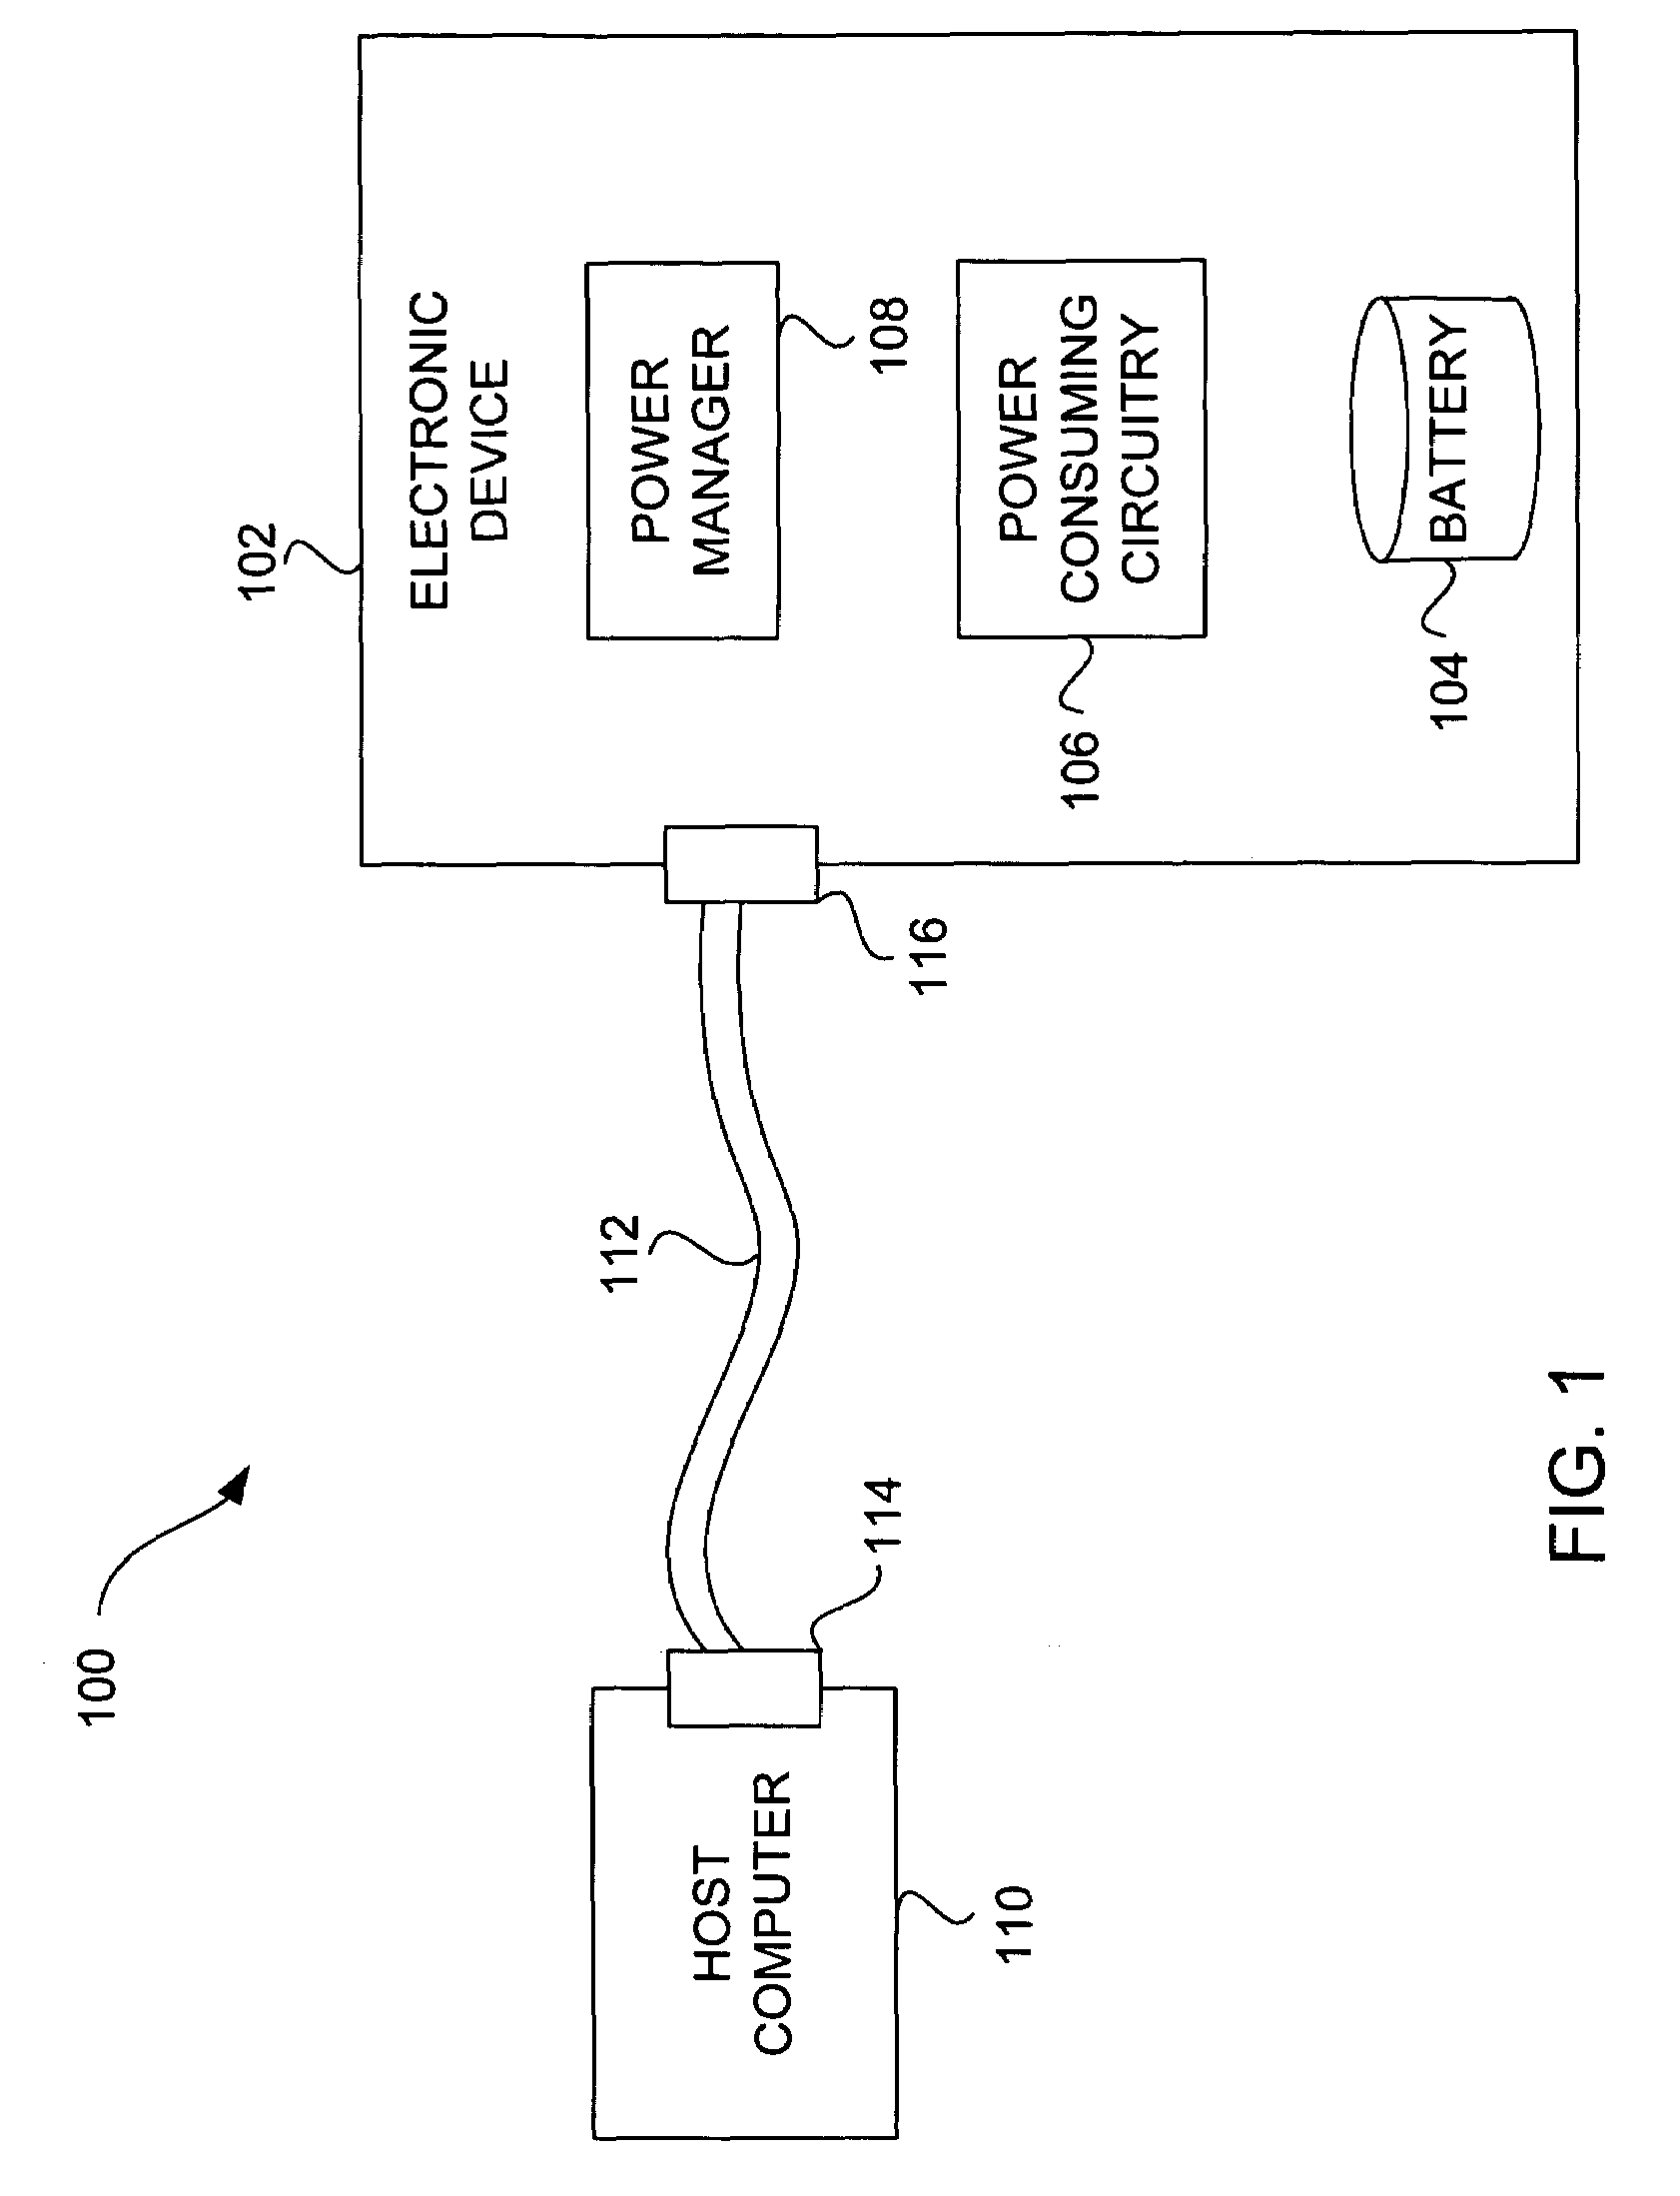 Method and system for operating a portable electronic device in a power-limited manner